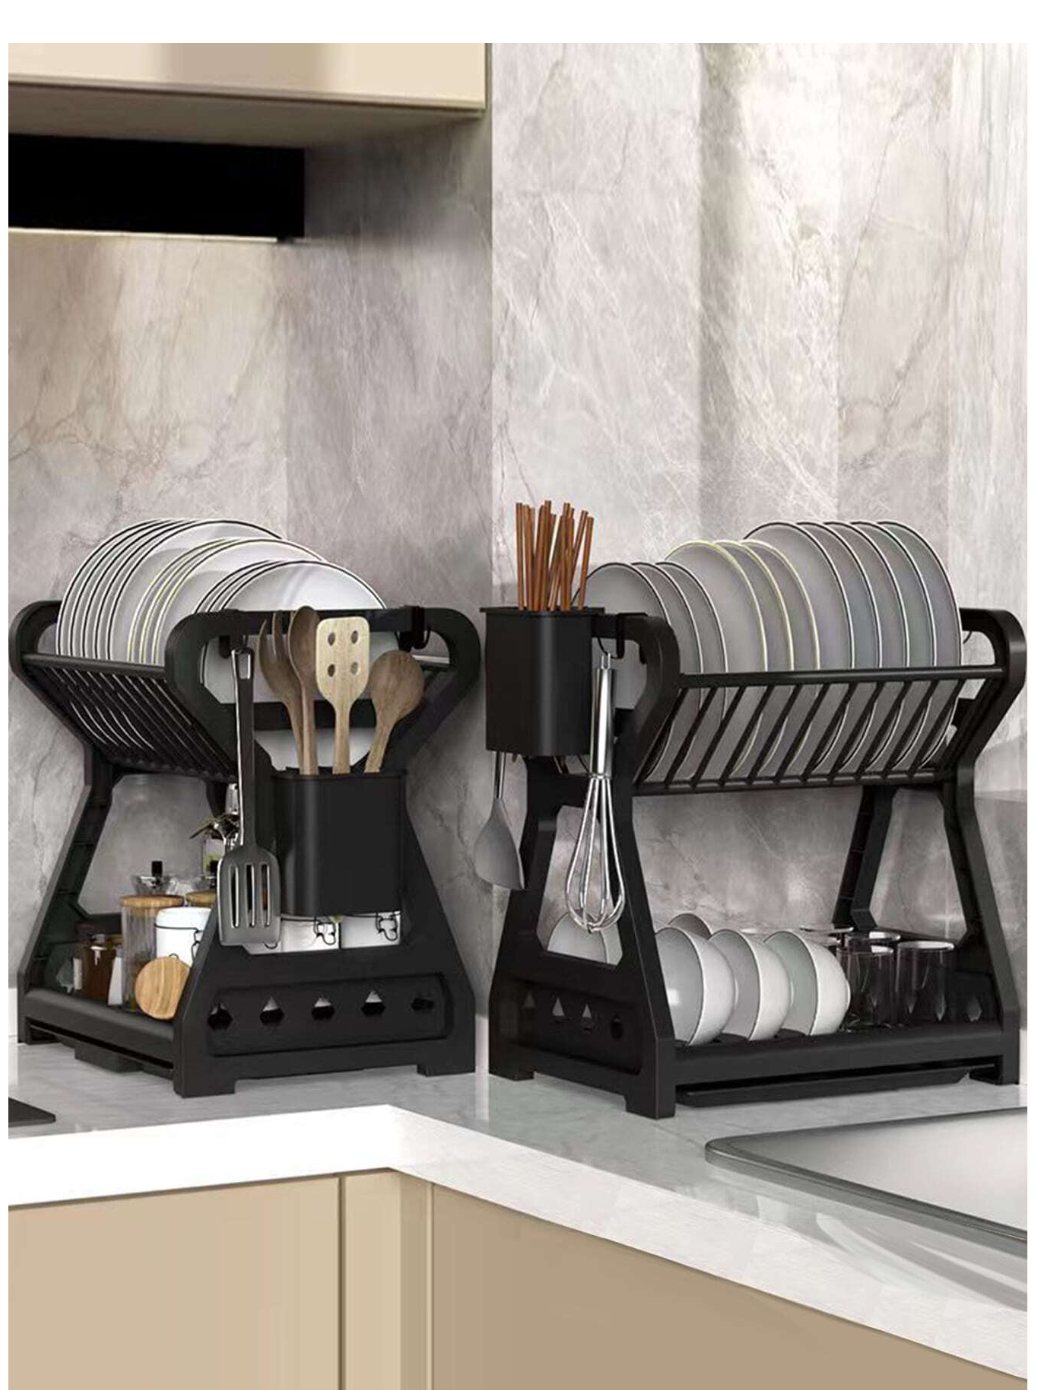 Black Magic Organizer: 1-Set Kitchen Counter Storage Rack with Water Draining Wizardry for Tableware and Bowls!